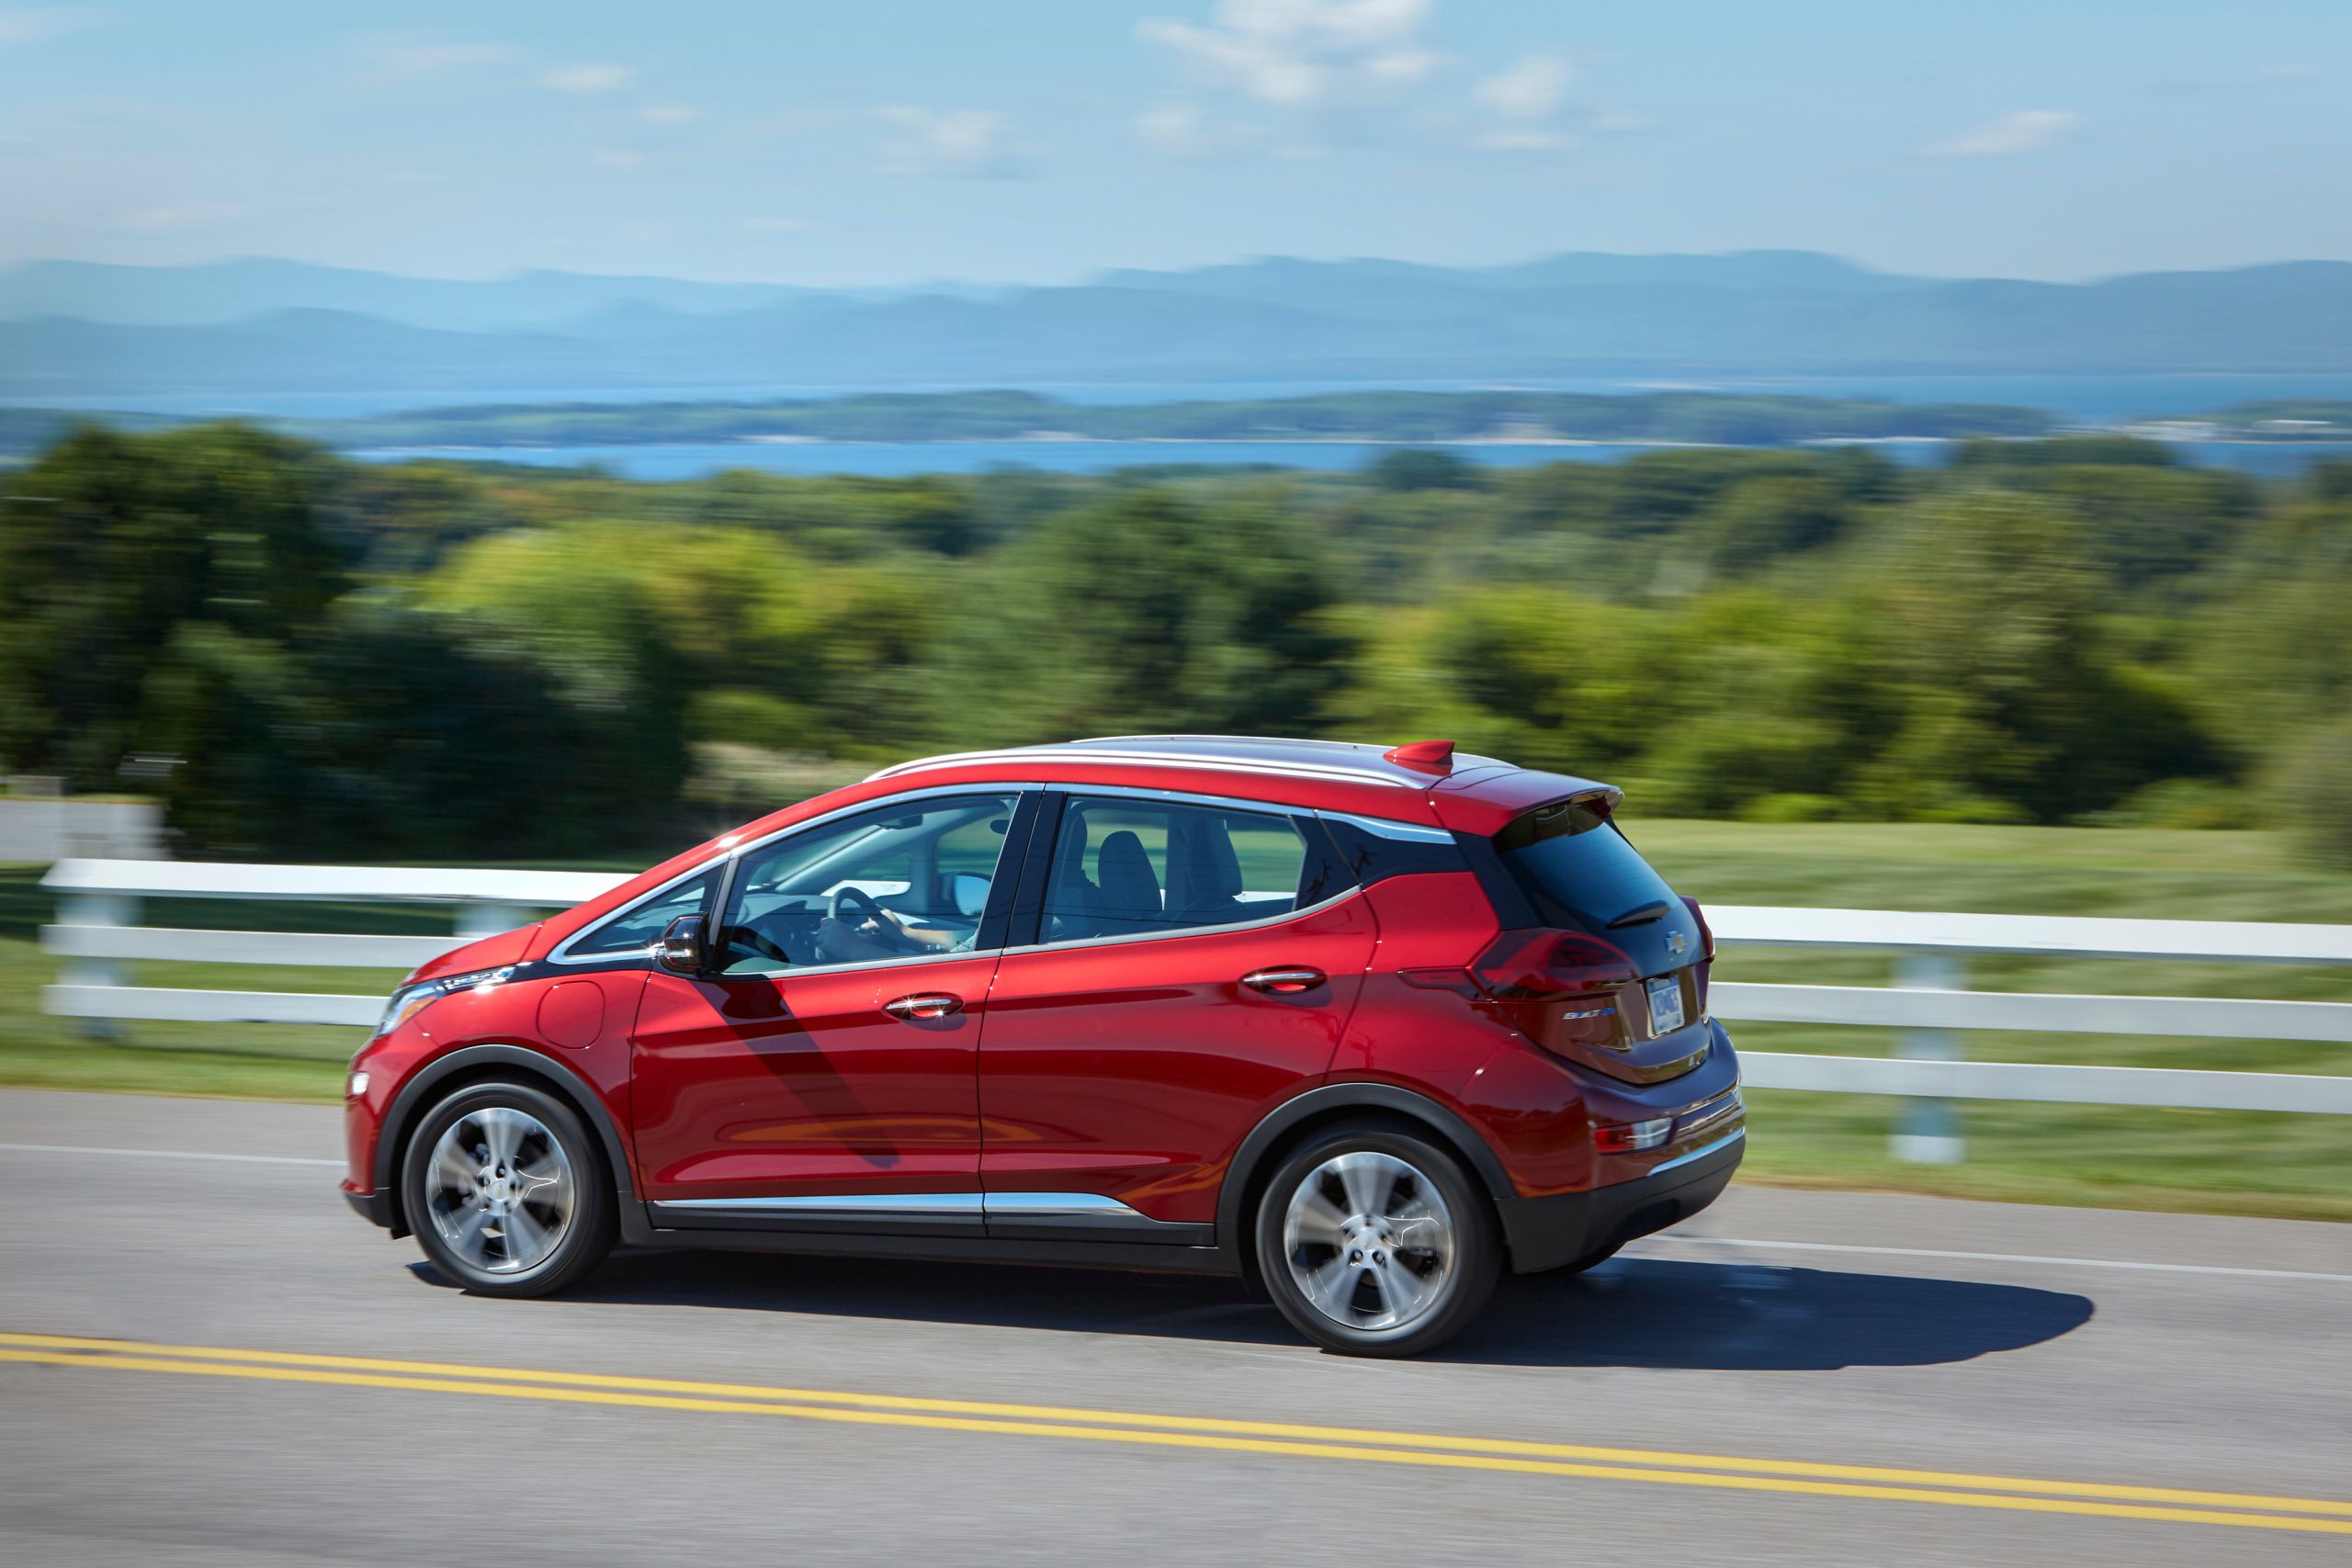 Red 2020 Chevy Bolt EV drives on waterfront road.